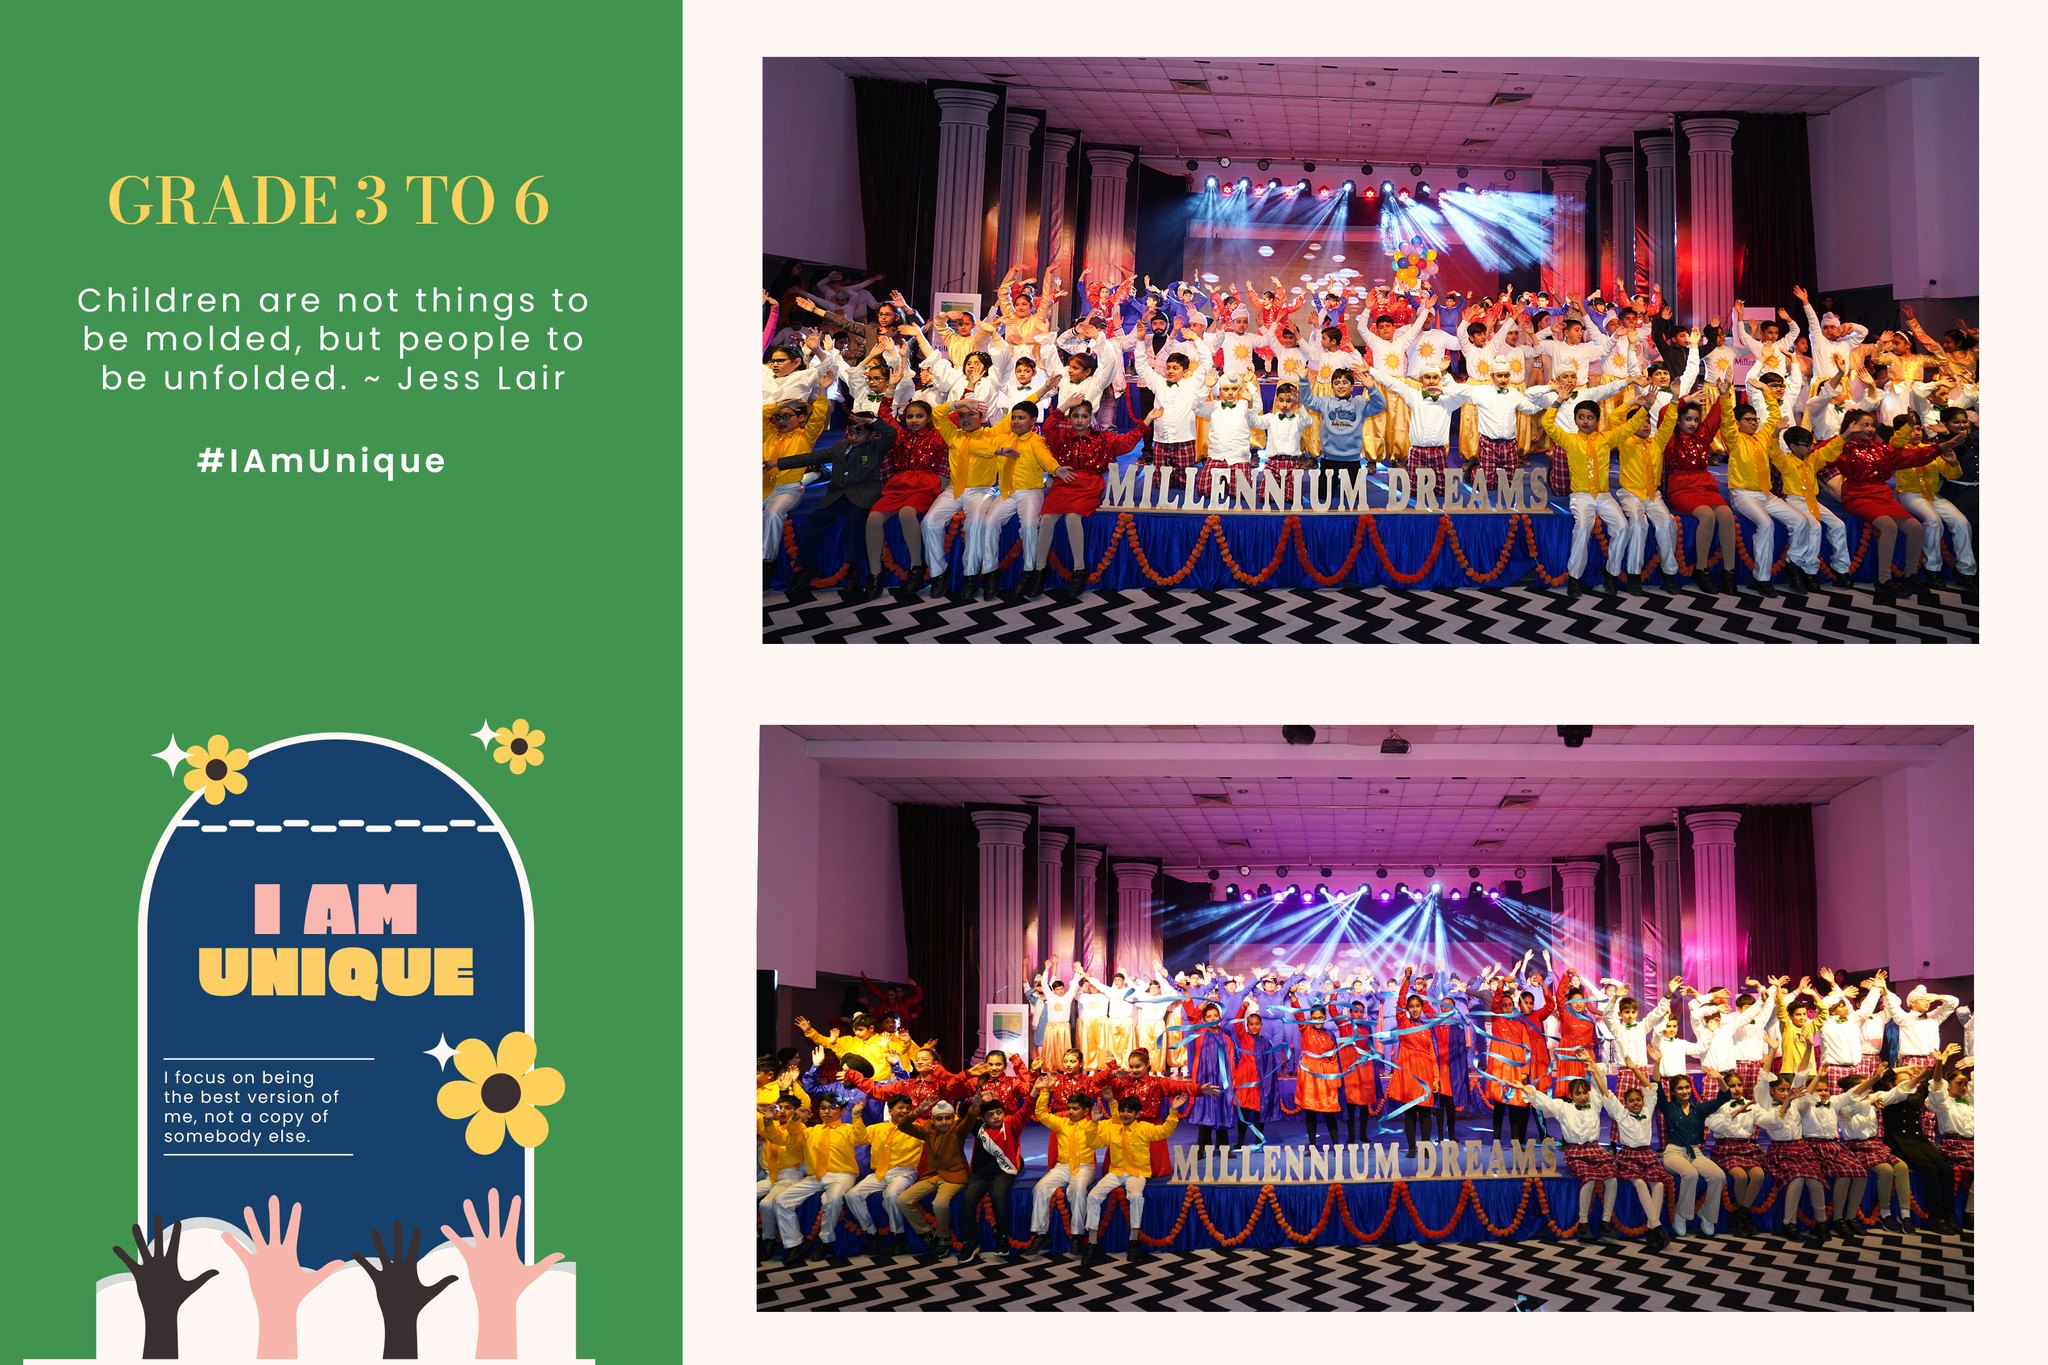 Annual Function 'The Millennium Dreams- Return to the Roots' (Grade 3 to 6)